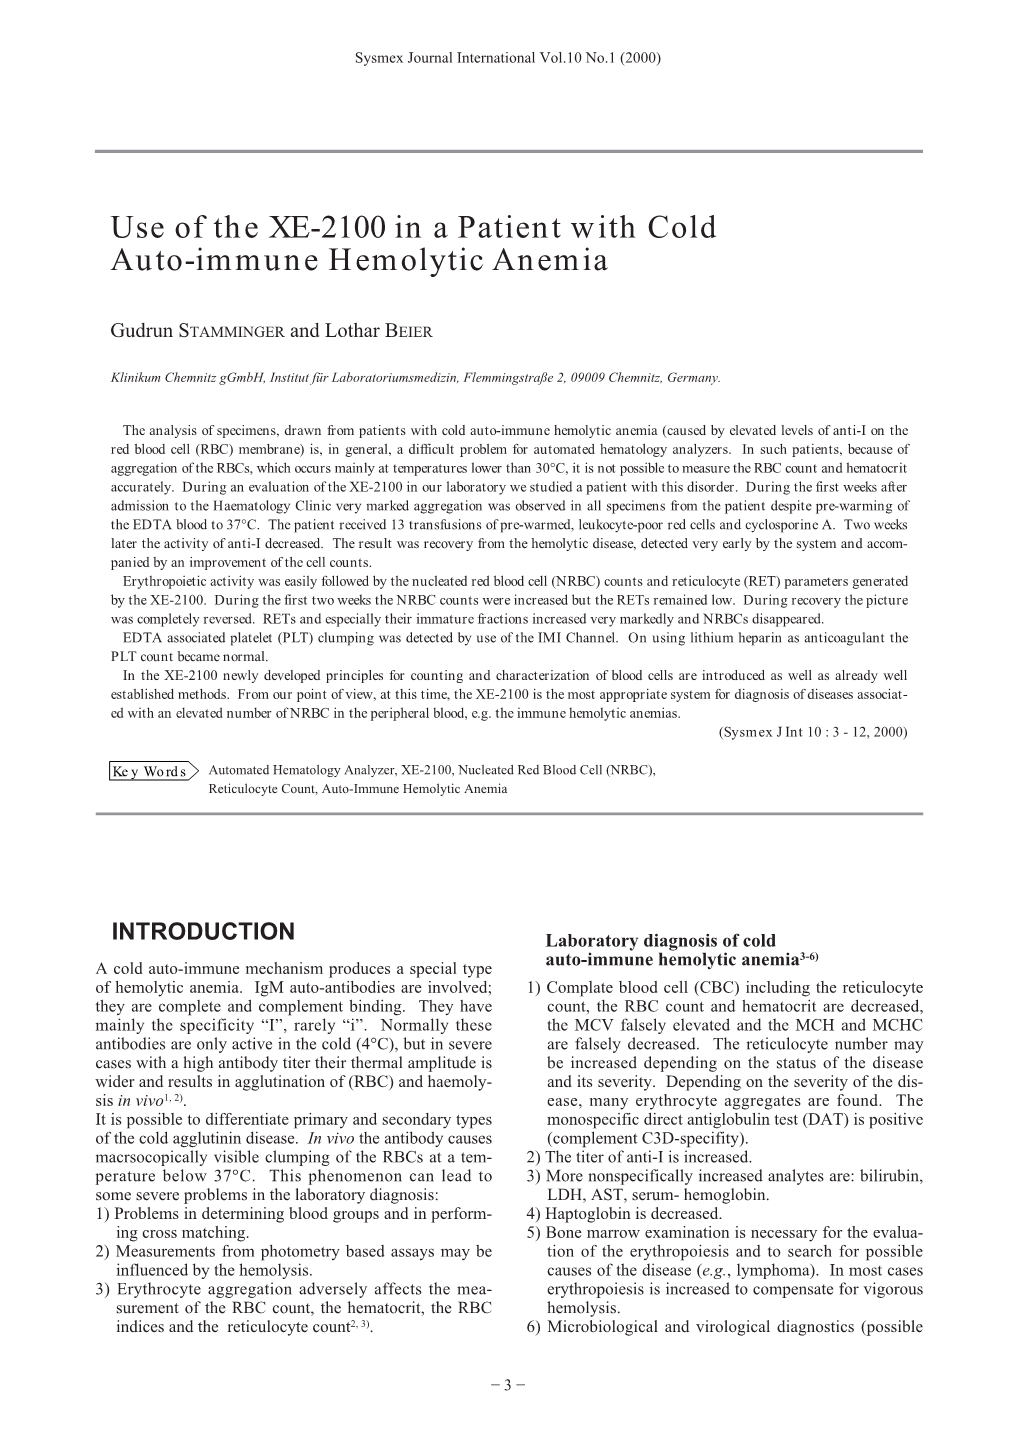 Use of the XE-2100 in a Patient with Cold Auto-Immune Hemolytic Anemia